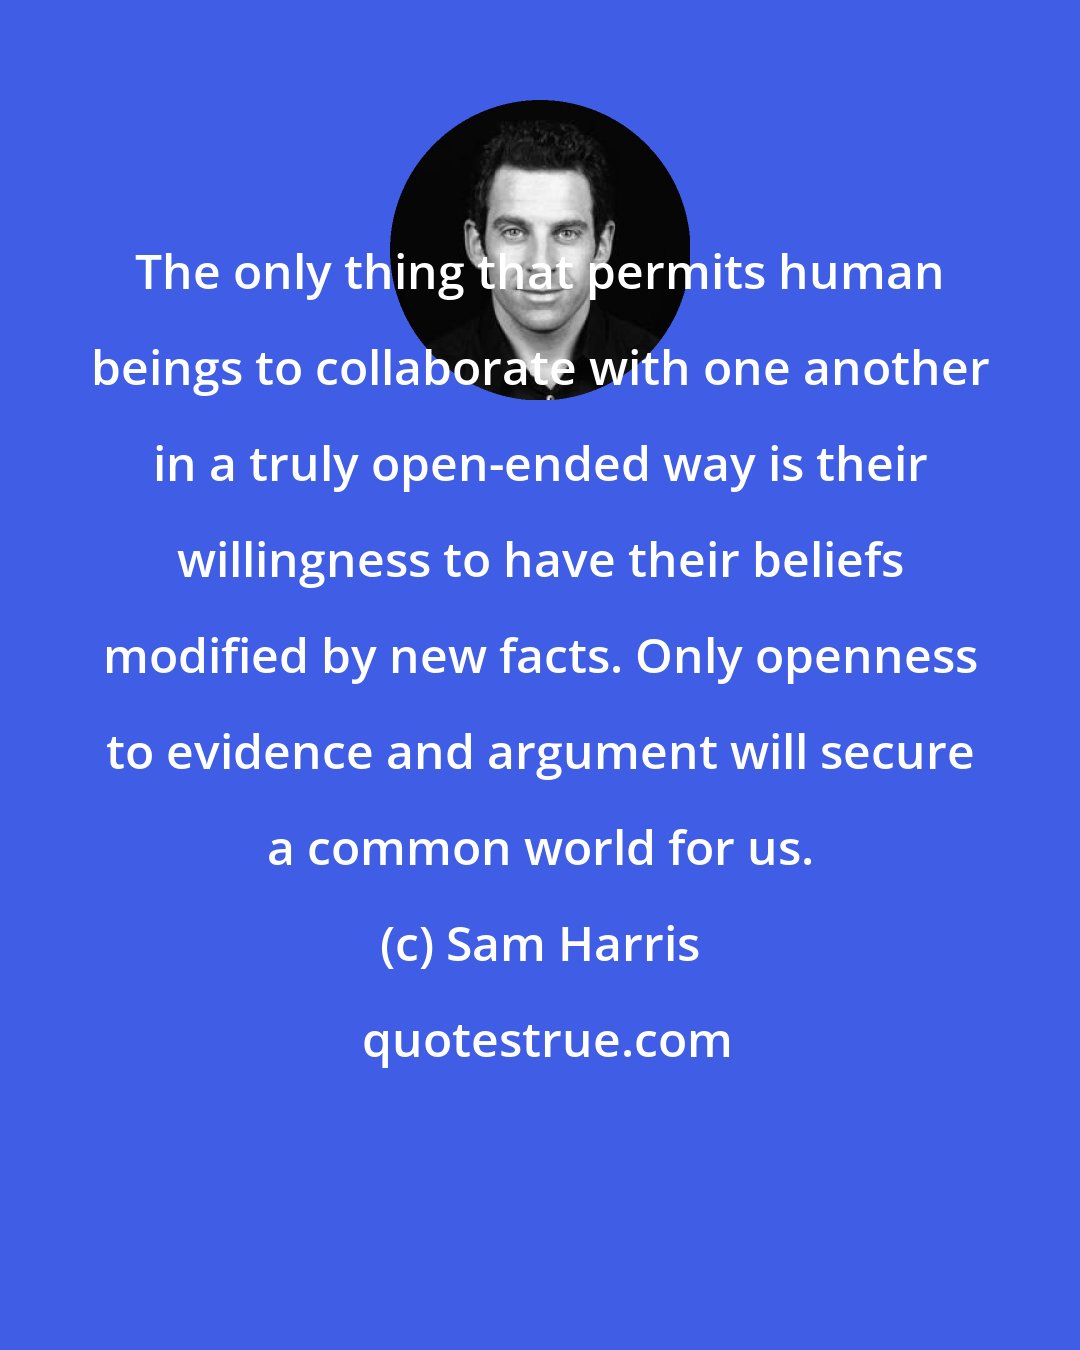 Sam Harris: The only thing that permits human beings to collaborate with one another in a truly open-ended way is their willingness to have their beliefs modified by new facts. Only openness to evidence and argument will secure a common world for us.